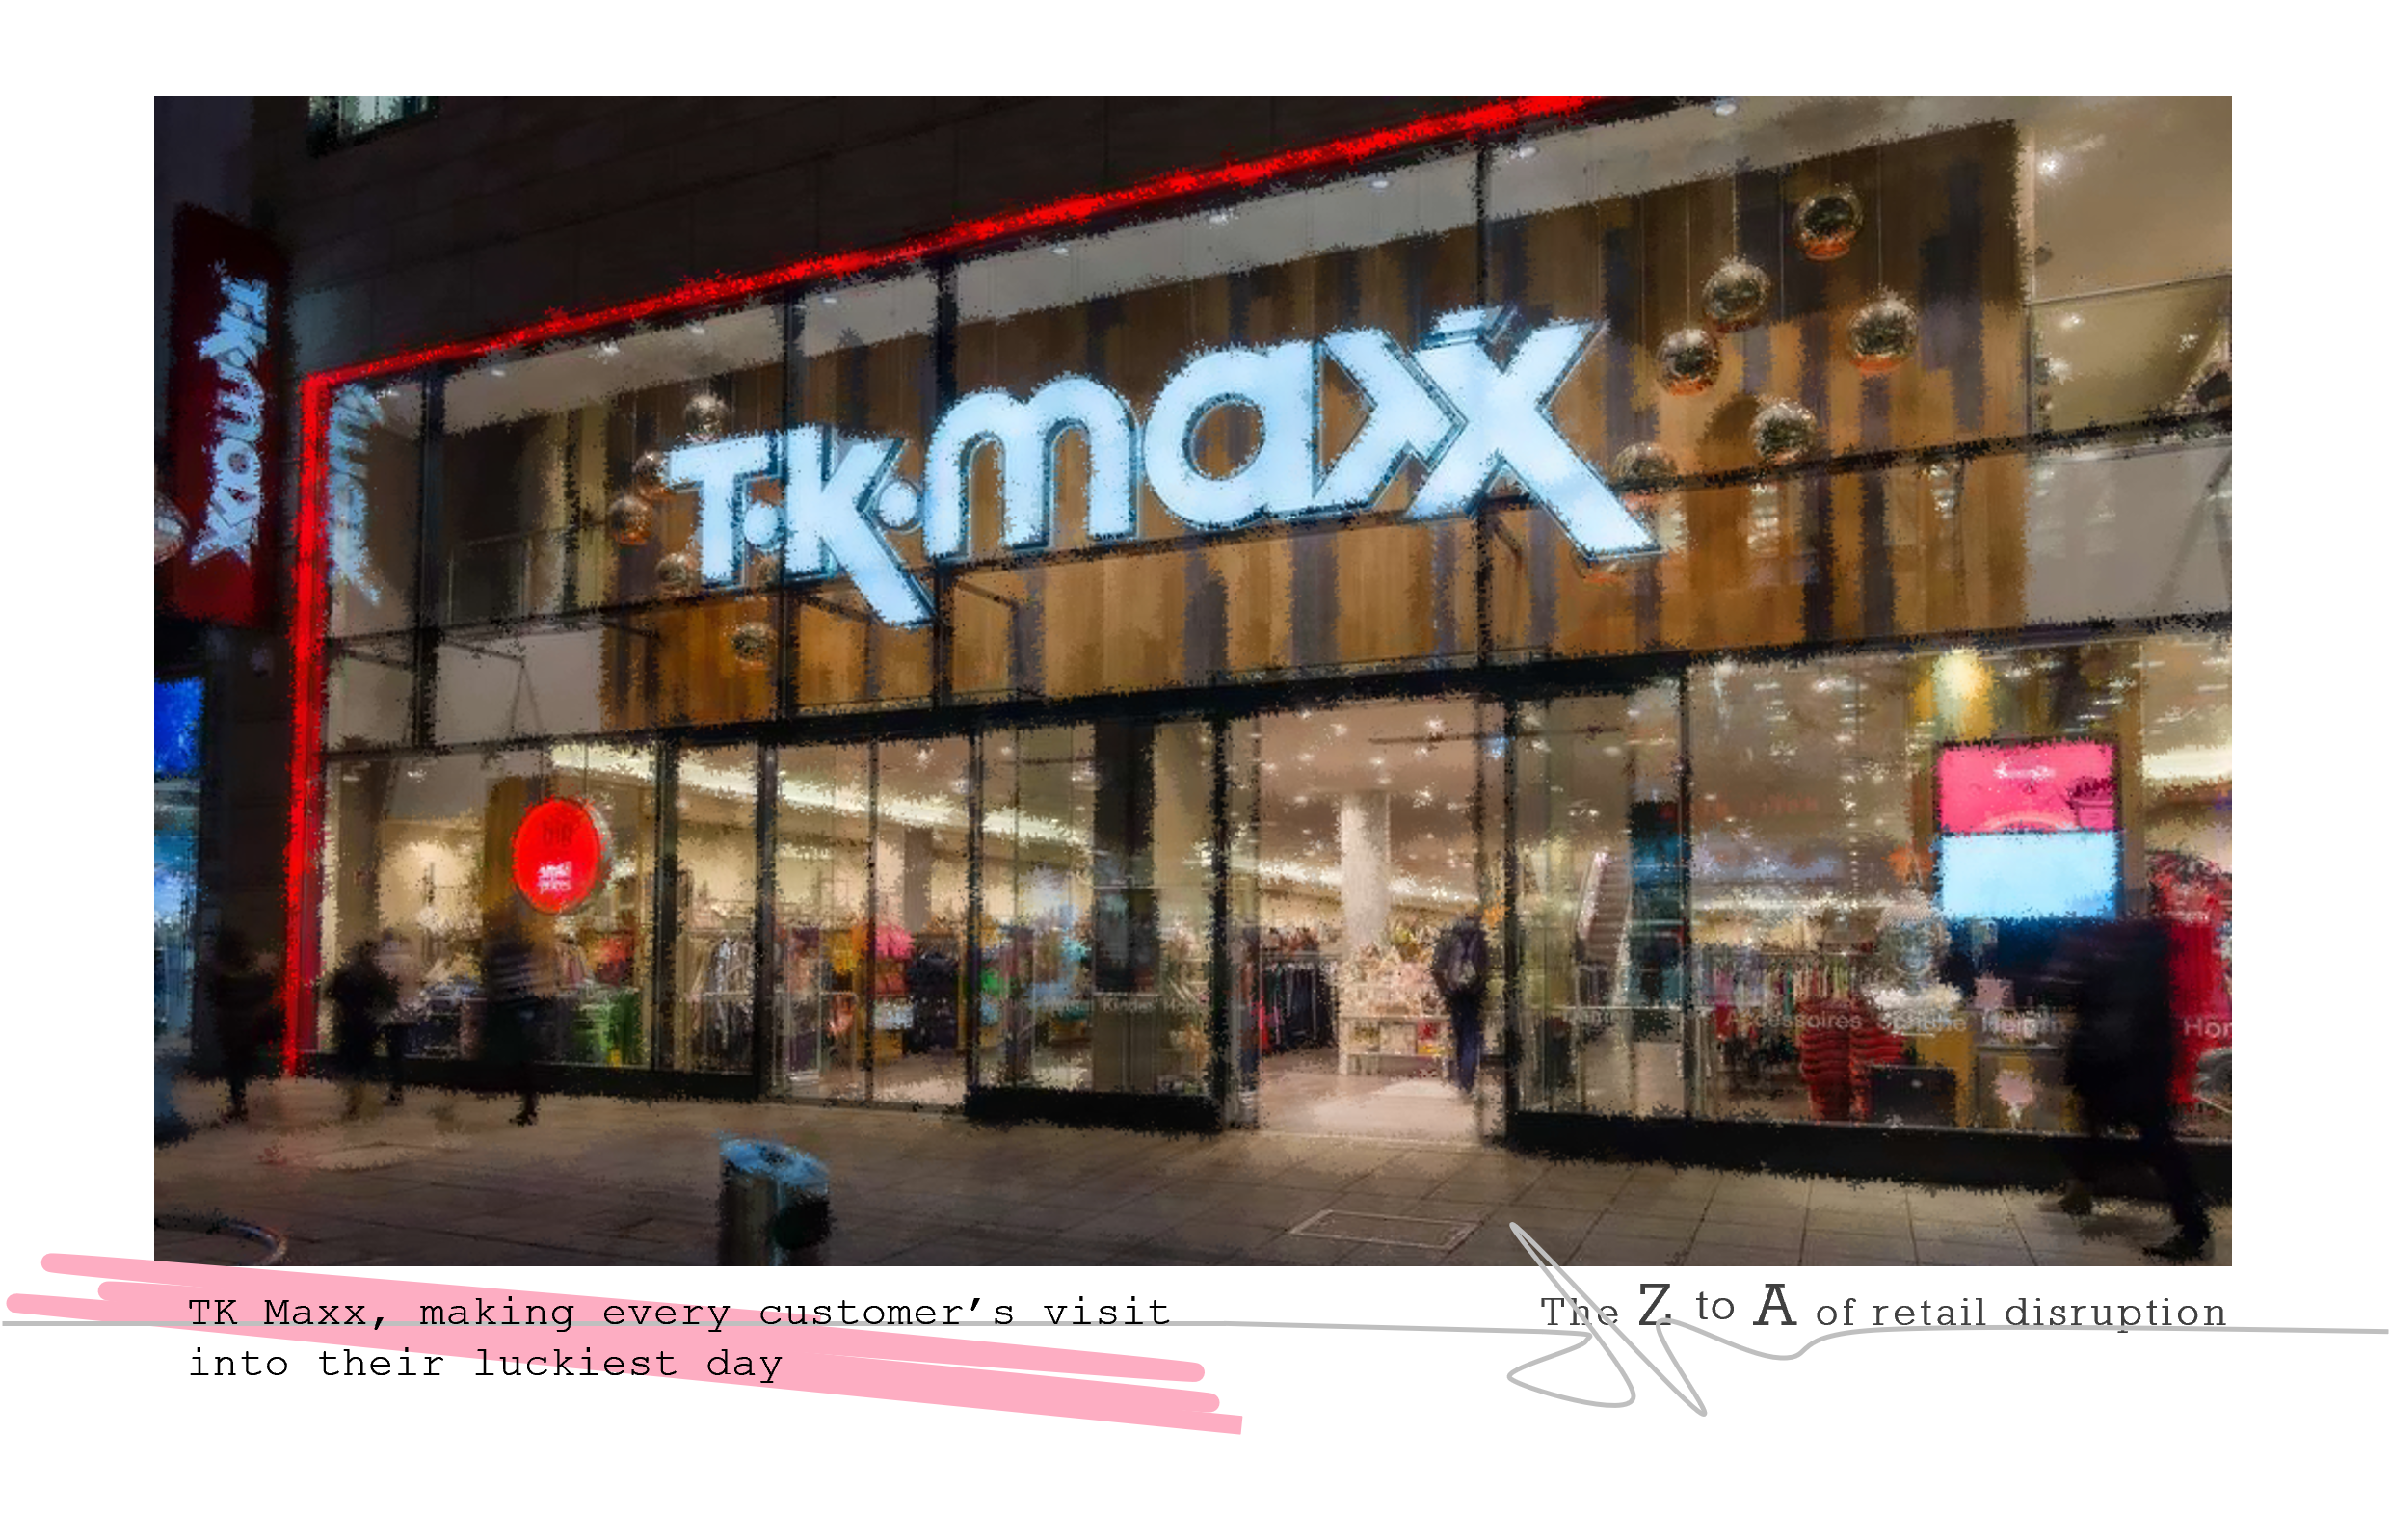 TK Maxx, making every customer’s visit into their luckiest day!